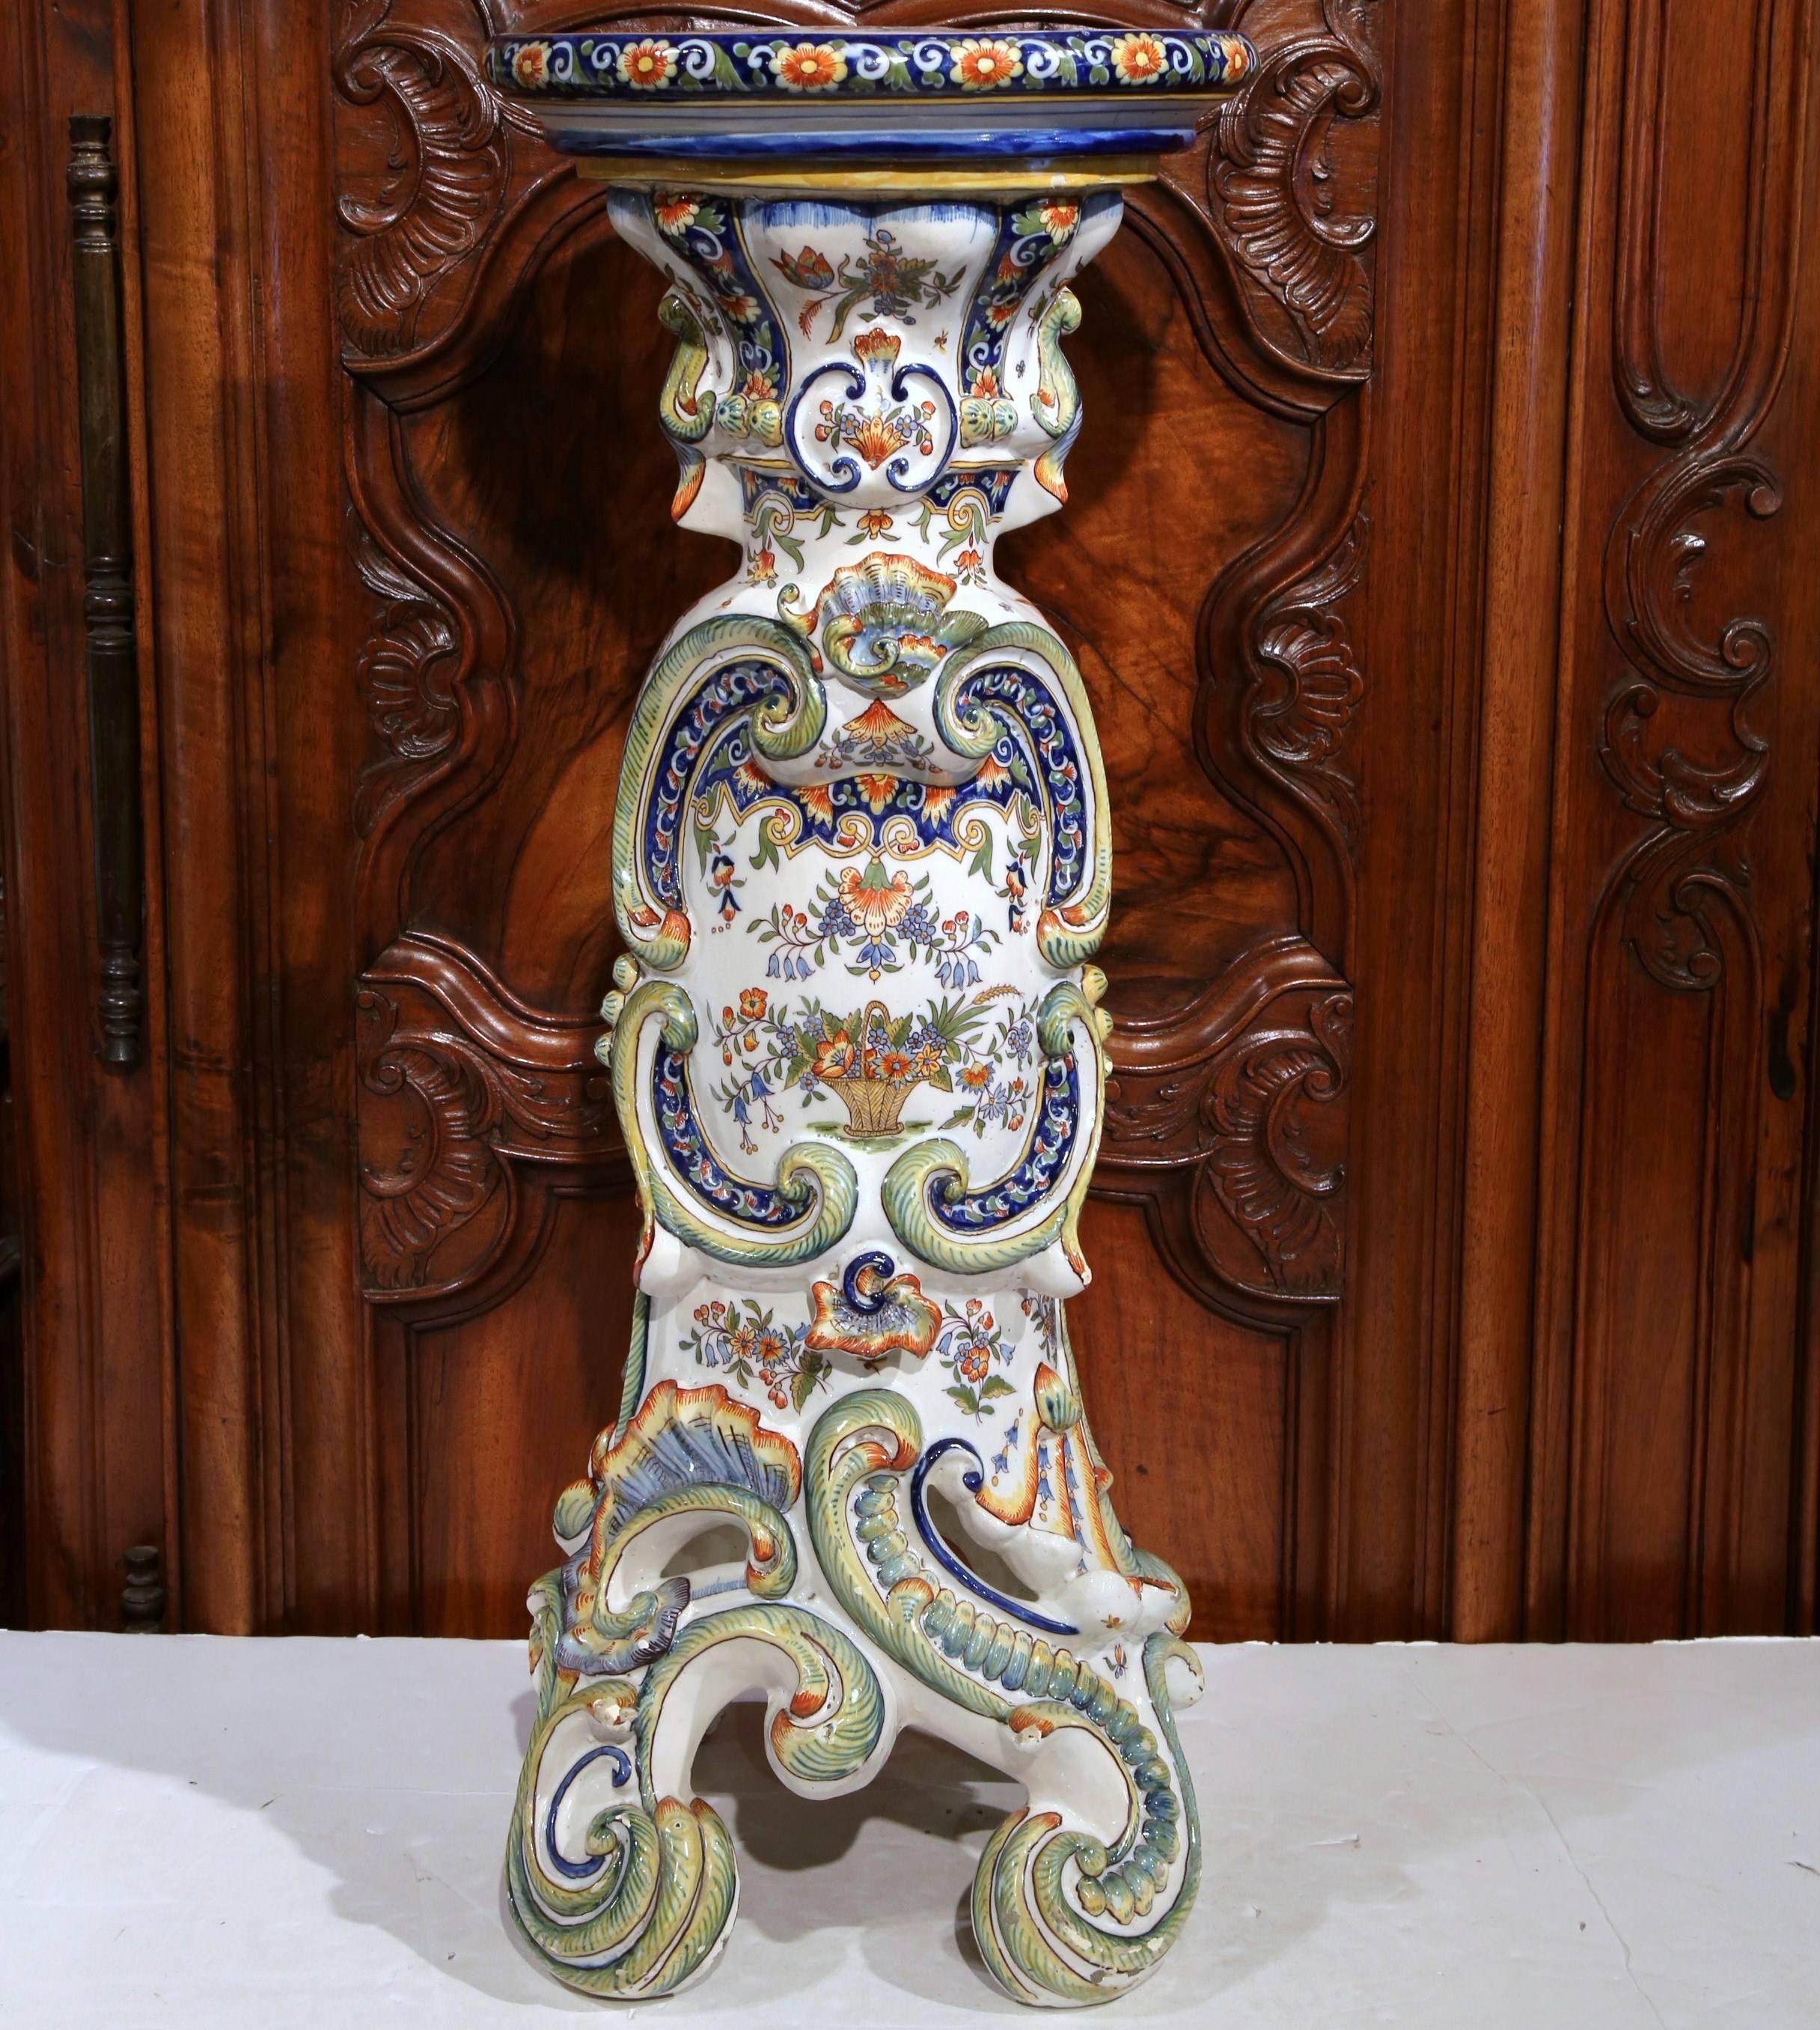 Bring practicality with this small colorful Majolica martini pedestal; crafted in Normandy, France, circa 1880, the elegant faience table sits on three scroll feet and features unique lines and carvings around the stem and neck under the round